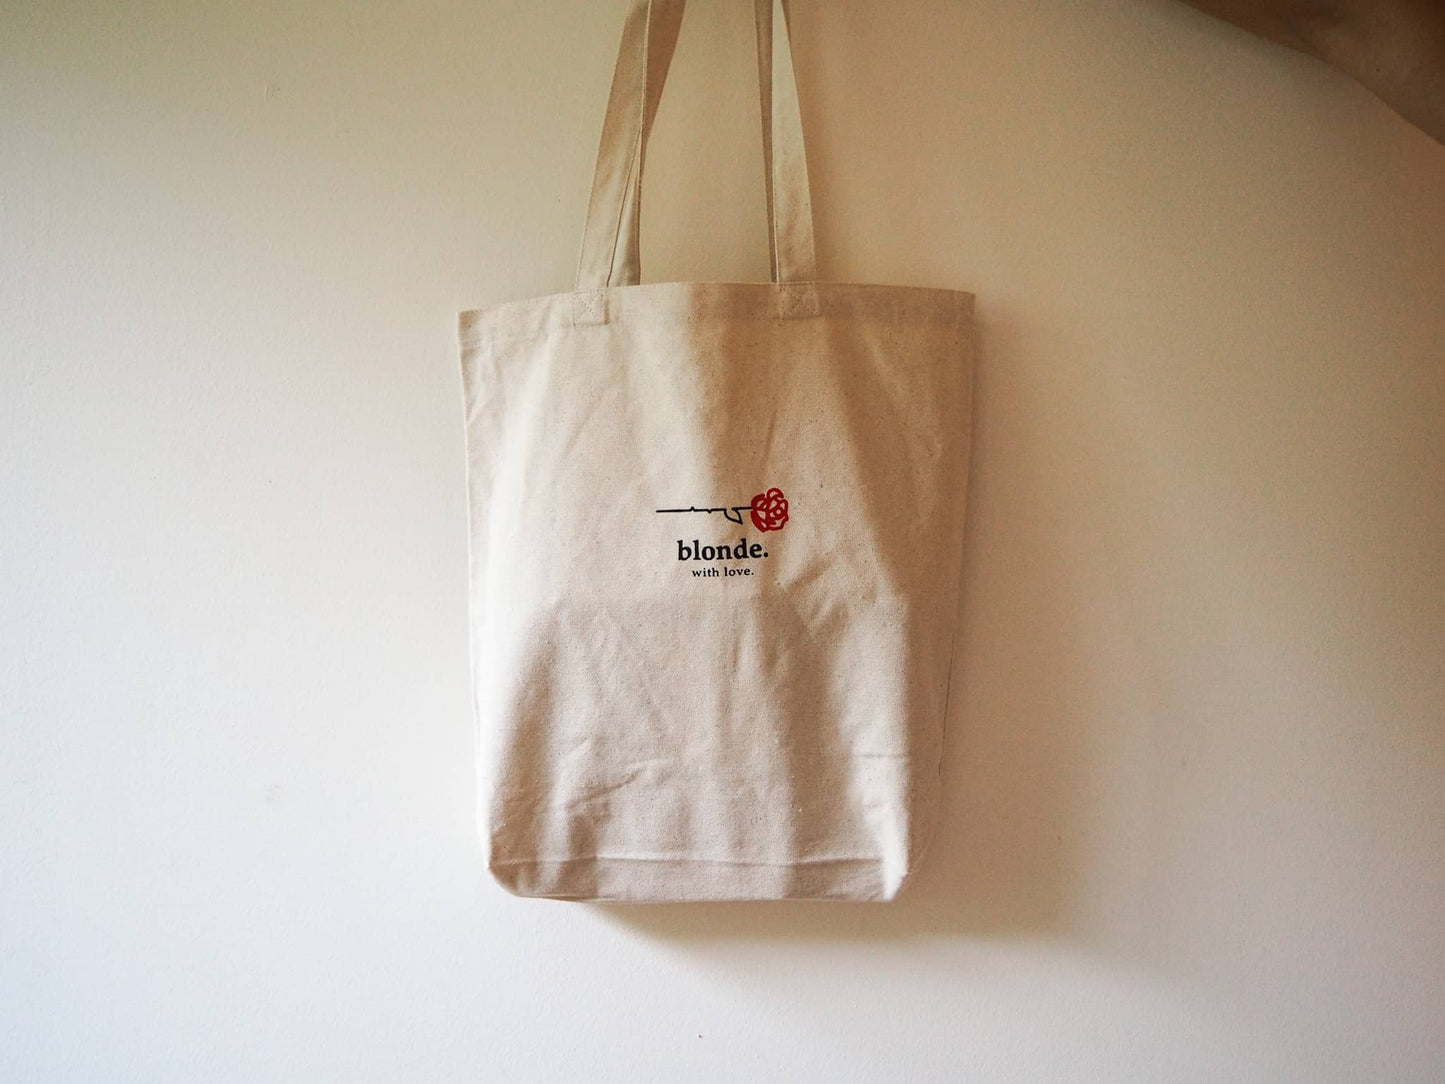 blonde. with love tote.